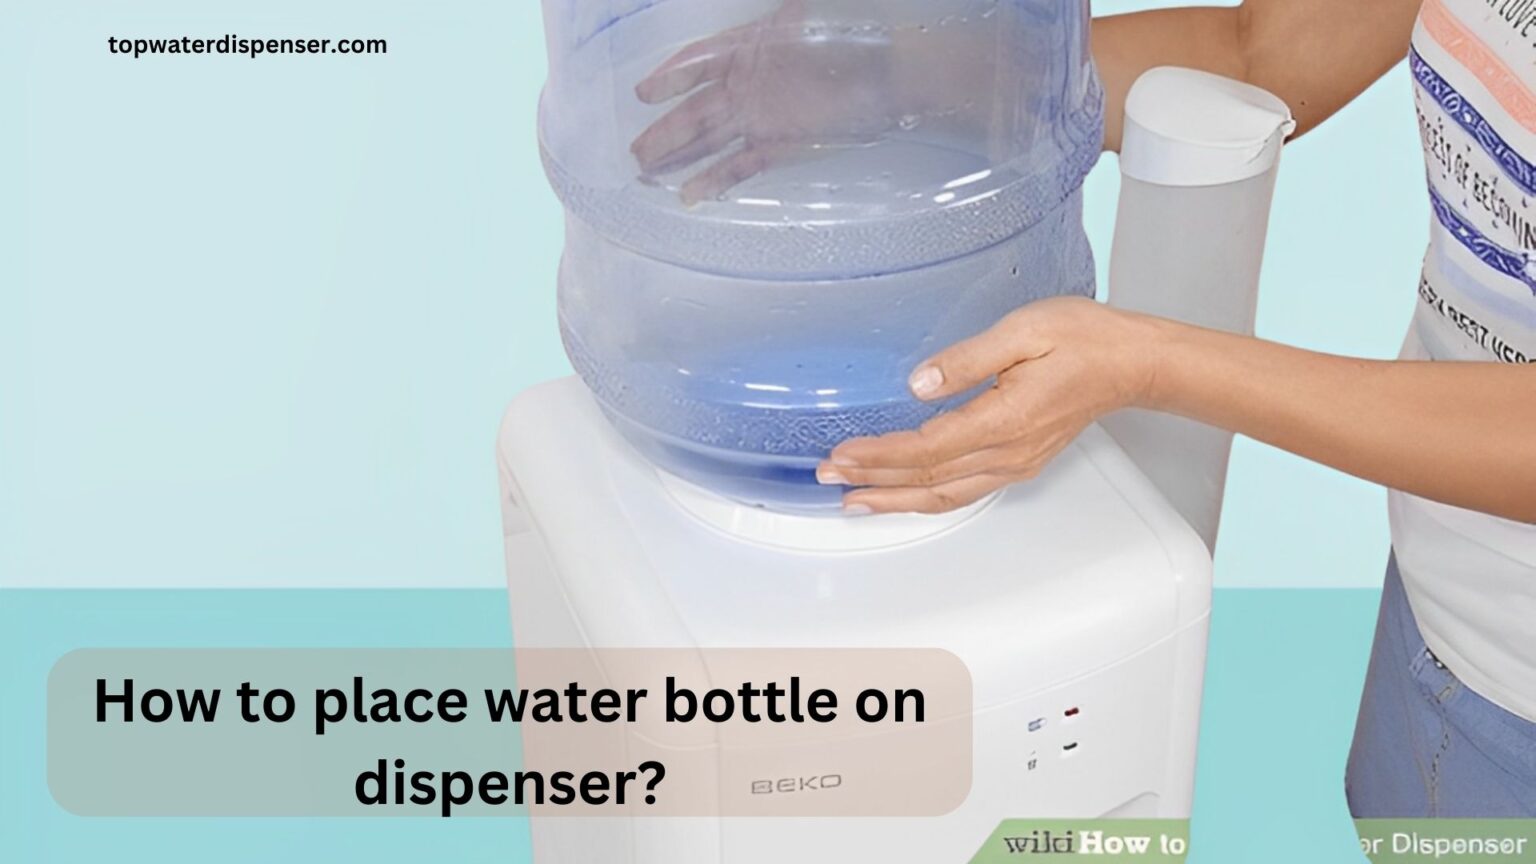 How to place water bottle on dispenser?